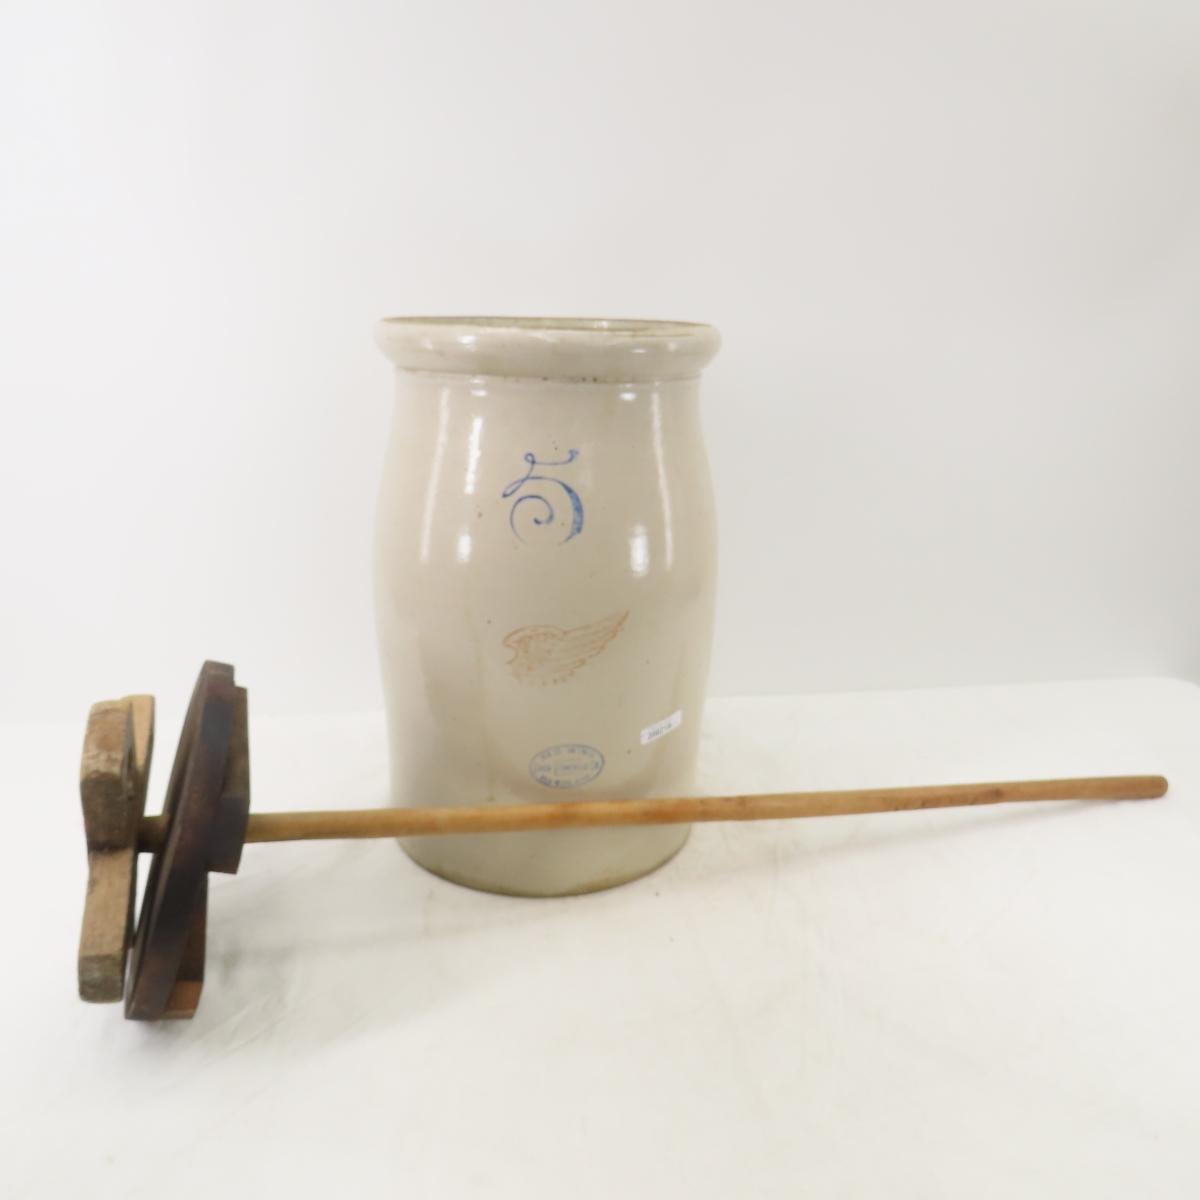 5 Gallon Red Wing Union Stoneware Butter Churn